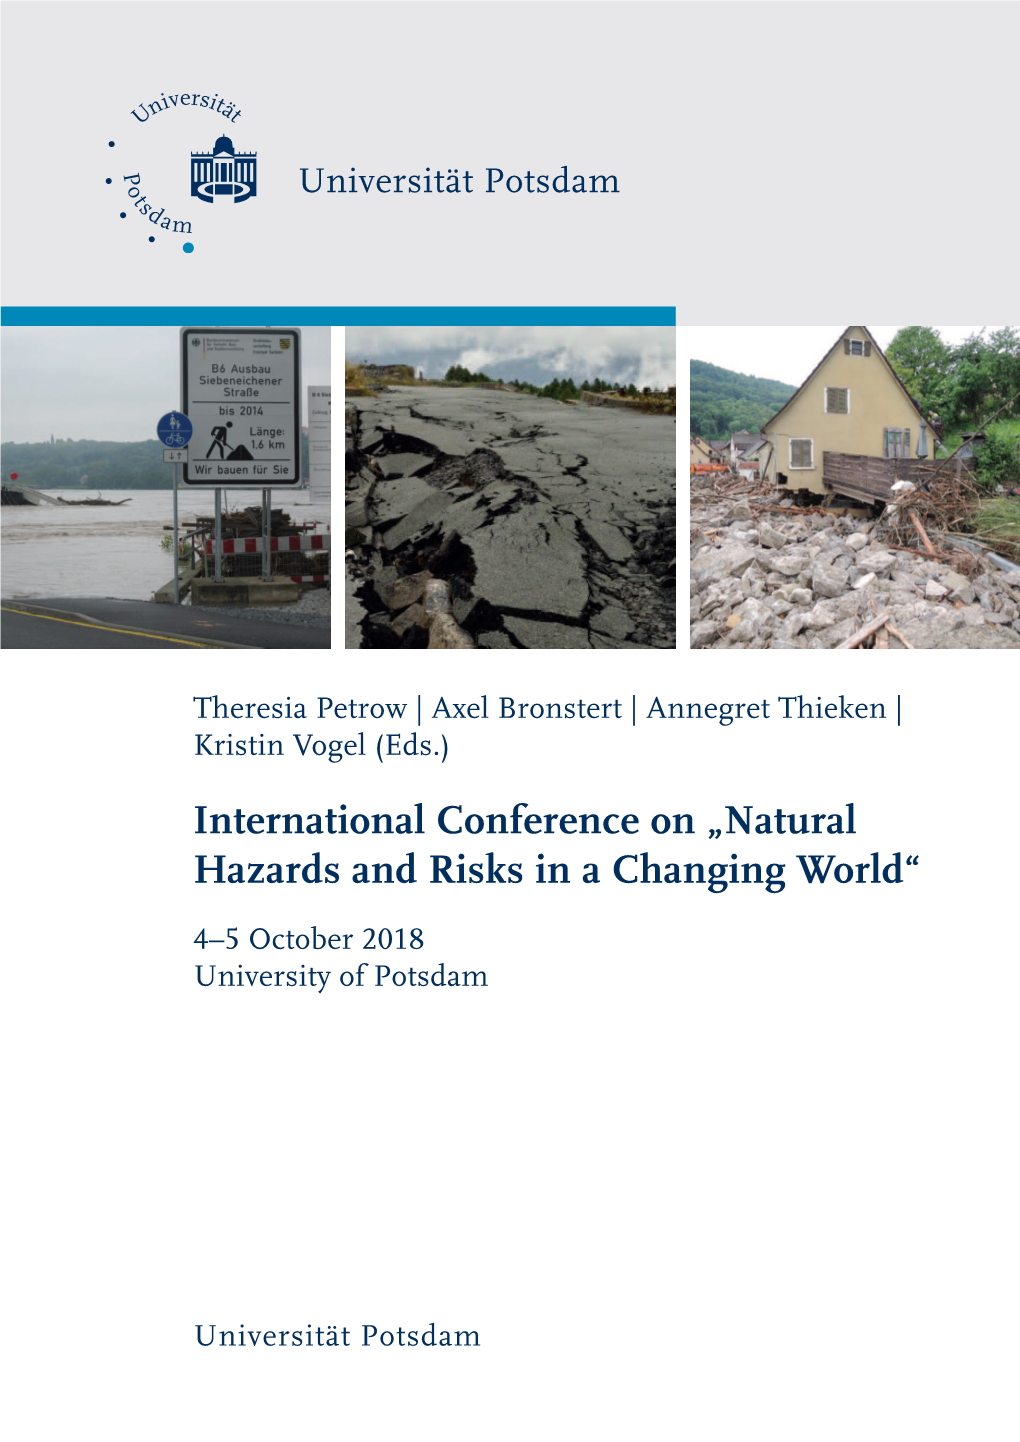 International Conference on "Natural Hazards and Risks in a Changing World"